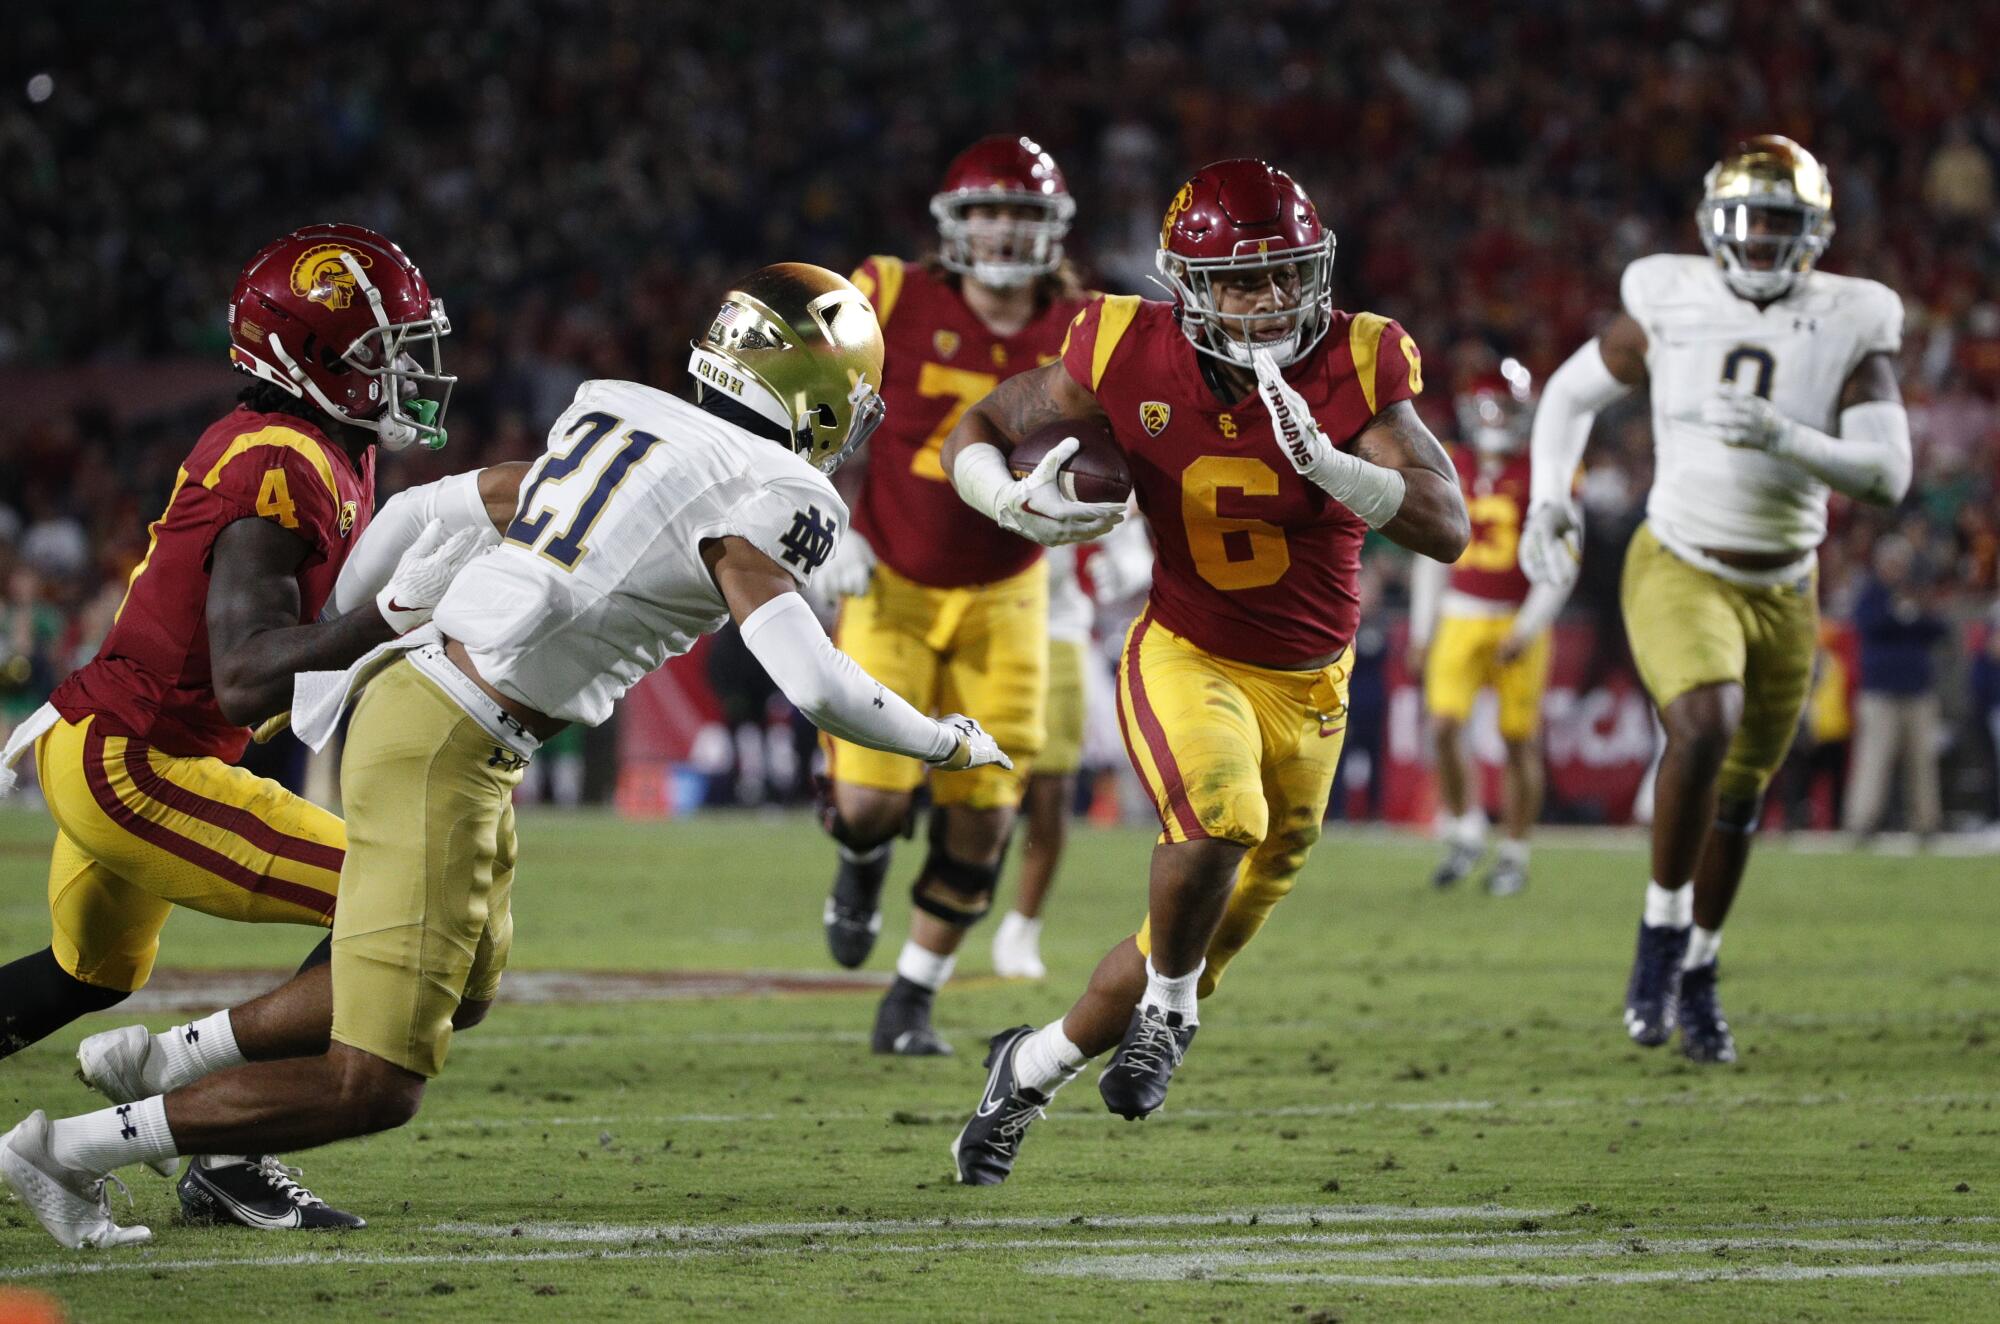 USC tailback Austin Jones finds running room against Notre Dame in the first half at the Coliseum.